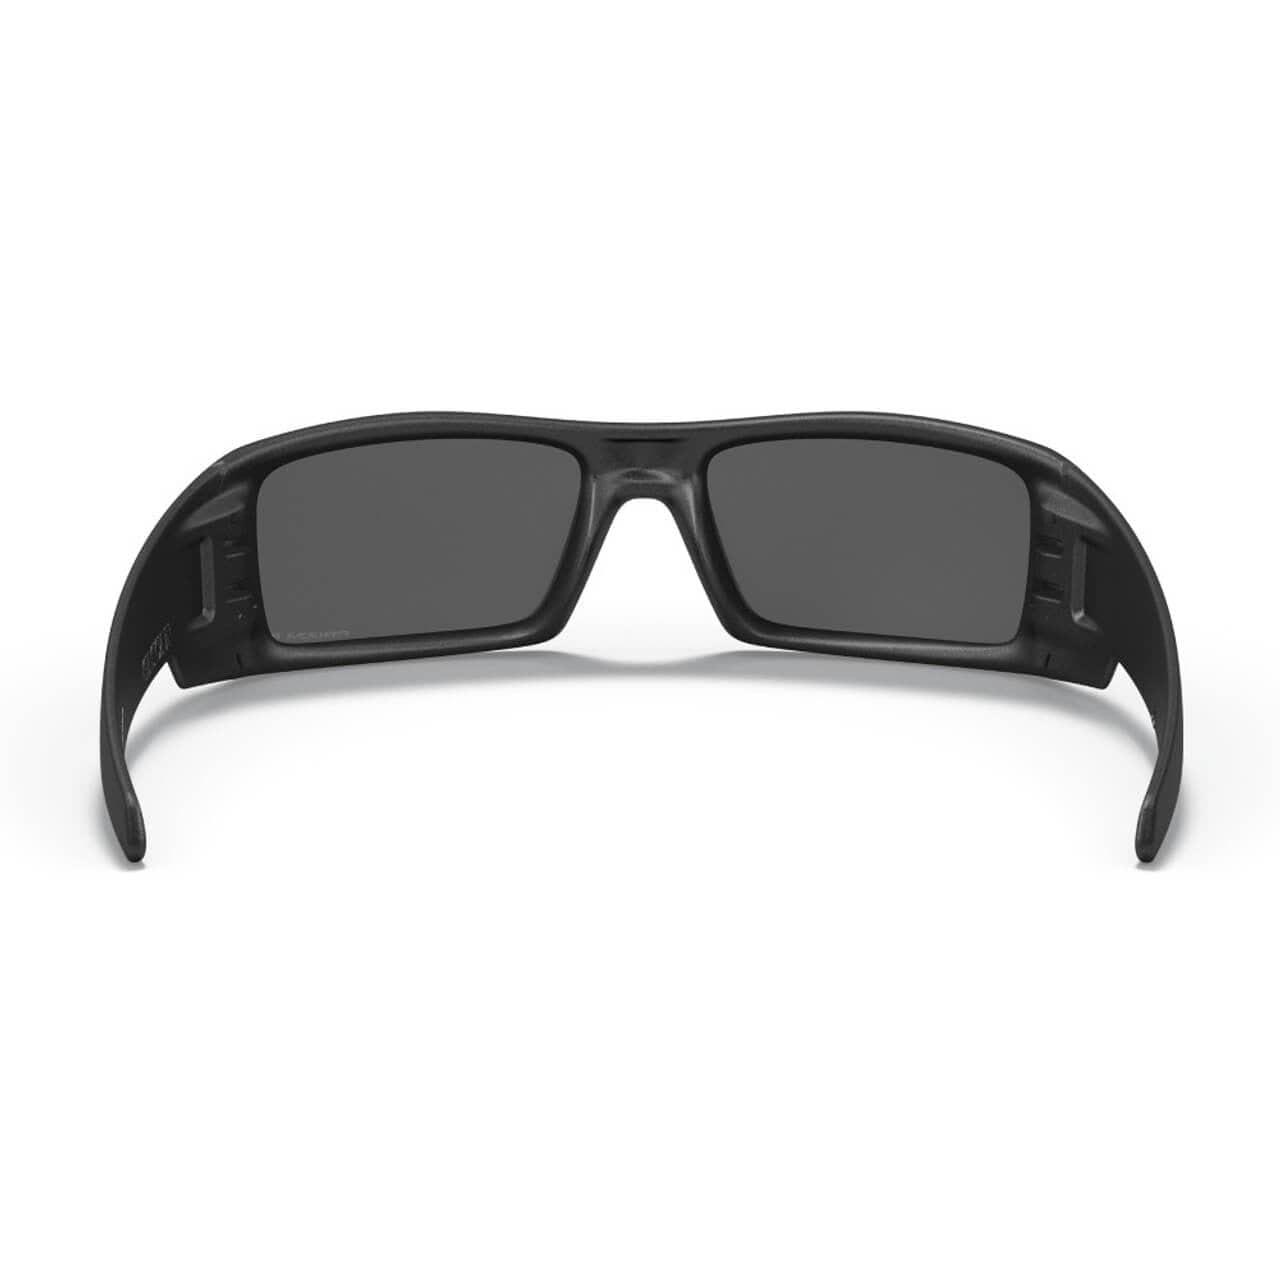 Oakley Gascan Sunglasses OO9014-3560 Steel Frame with Prizm Black Polarized Lens Inside View